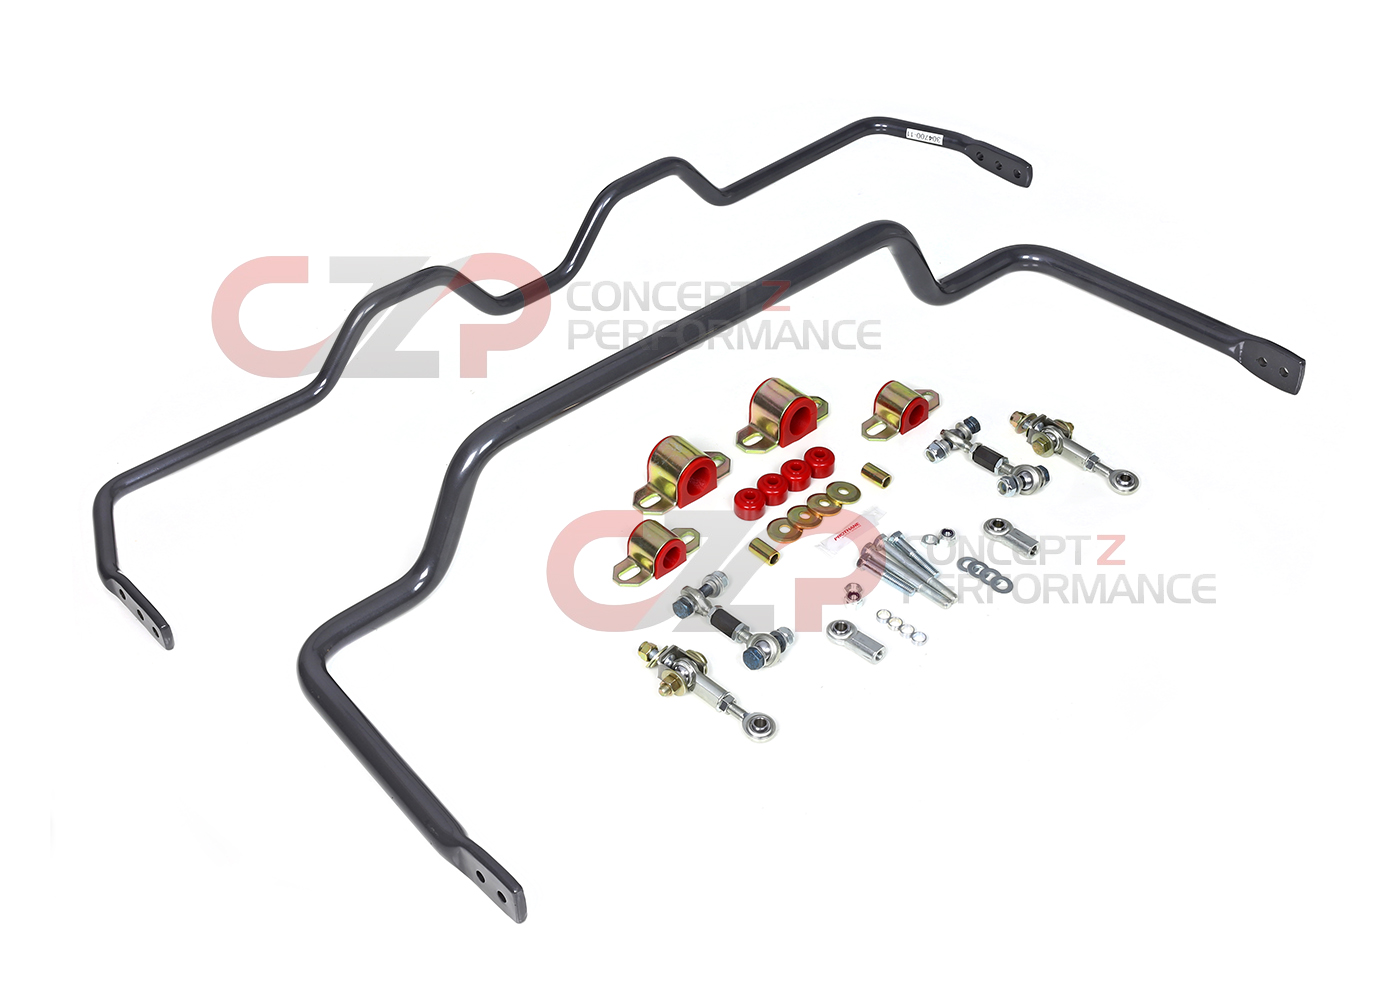 Adjustable anti sway bars for nissan 300zx #6